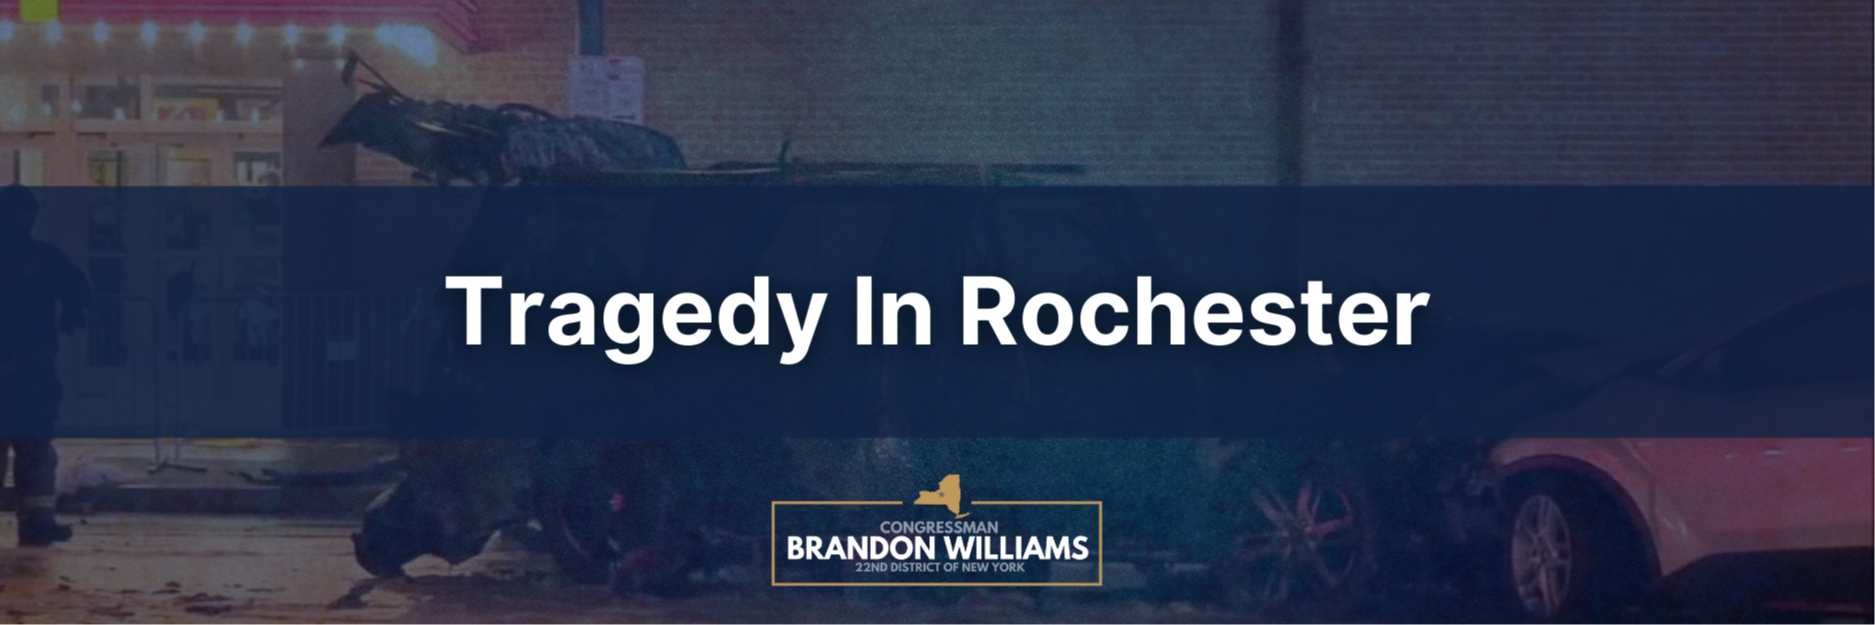 Rep. Williams on the tragedy in Rochester